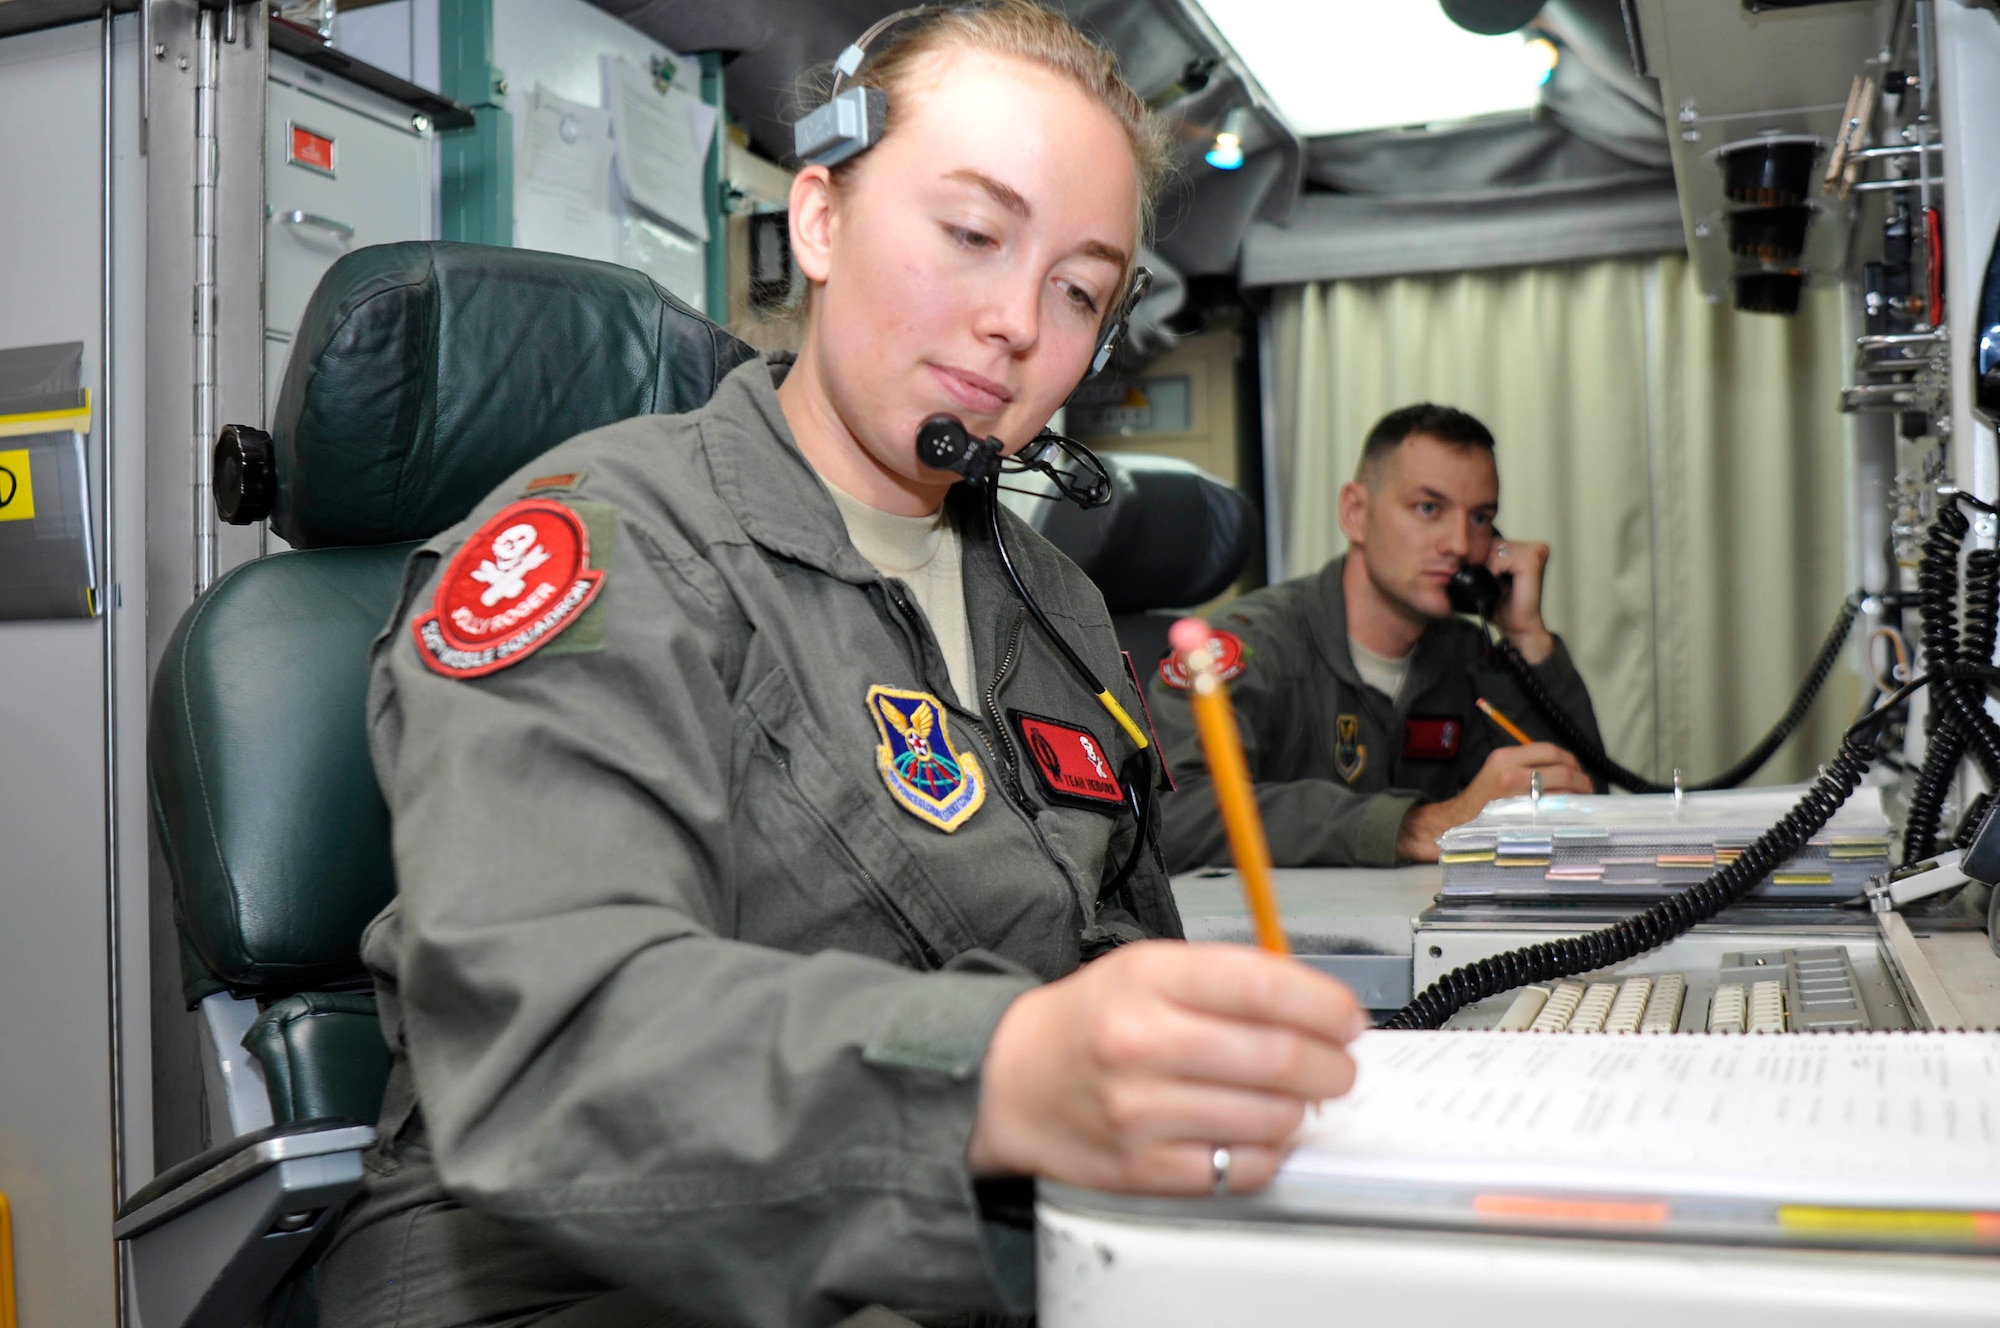 Second Lieutenant Teah Heidorn, 320th Missile Squadron deputy combat crew commander, writes notes during a Simulated Electronic Launch-Minuteman test inside a launch control center at a missile alert facility in the 90th Missile Wing missile complex, Aug. 21, 2018. Accomplishing the SELM validates these claims and increases the deterrent capability of the Minuteman III ICBM weapon system. (U.S. Air Force photo by Senior Airman Breanna Carter)